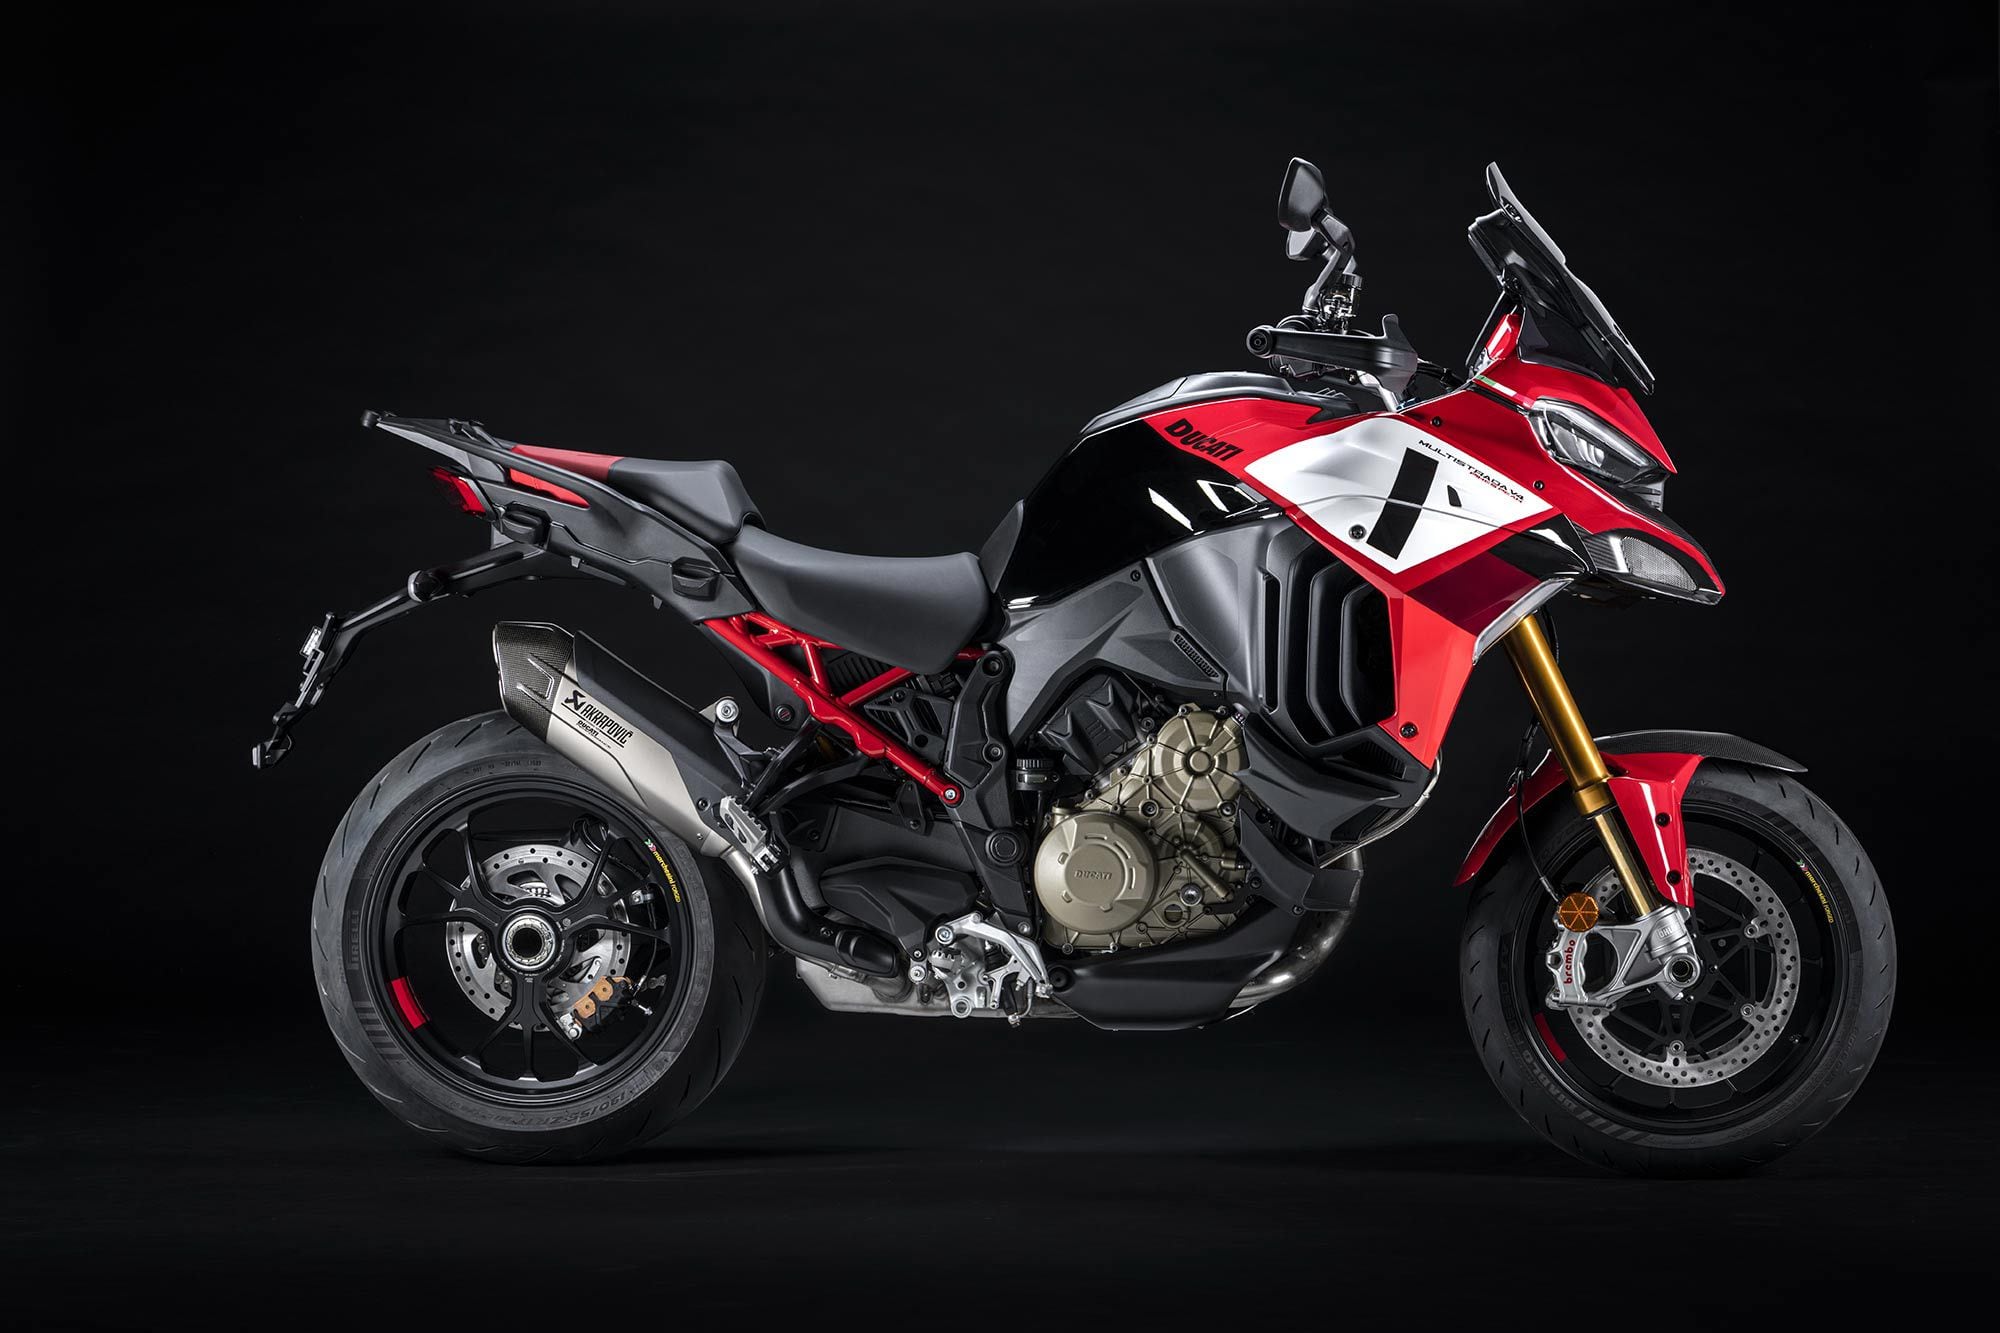 The new Multistrada V4 Pikes Peak takes a Ducati favorite and refocuses it for the pavement with 17-inch wheels and a single-sided swingarm.